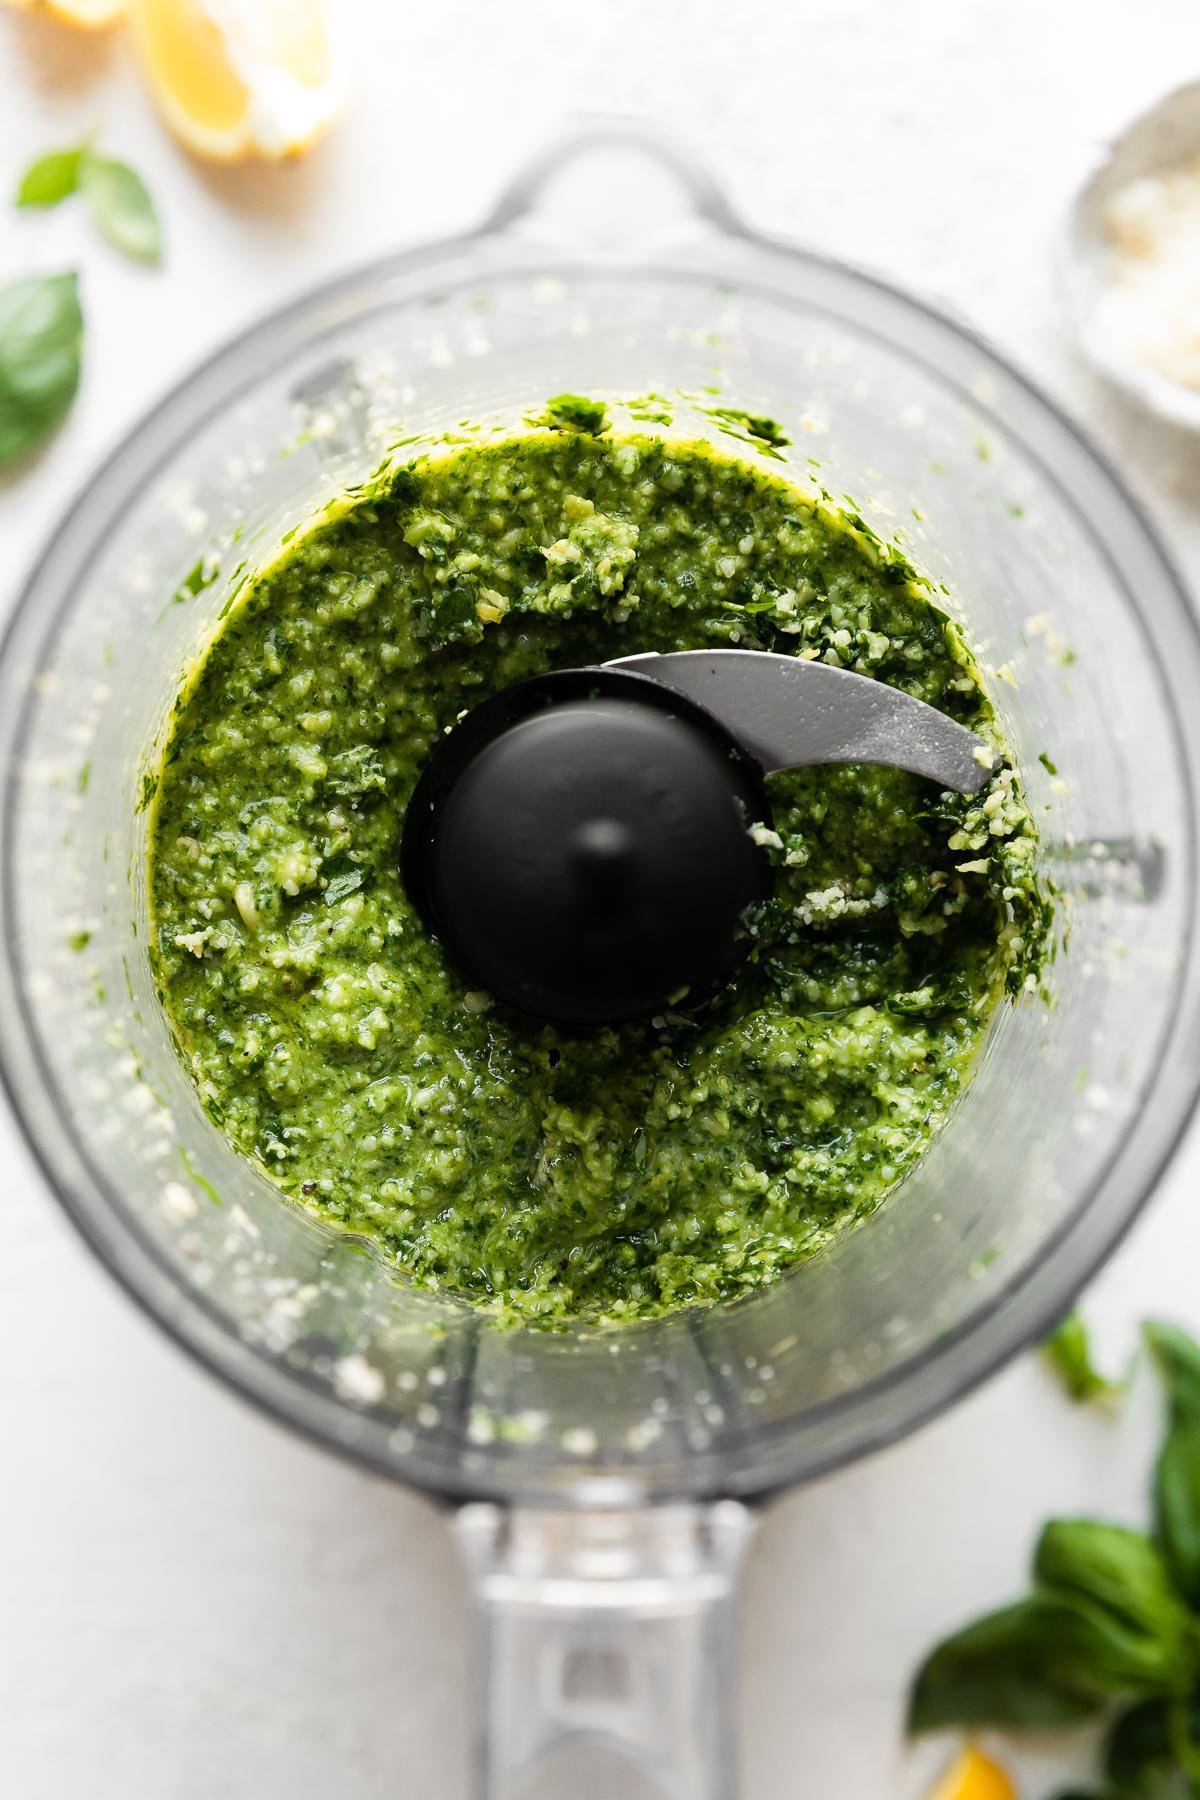 Blended lemon basil pesto in a food processor carafe, atop a white surface surrounded by additional pesto ingredients that are out of focus.